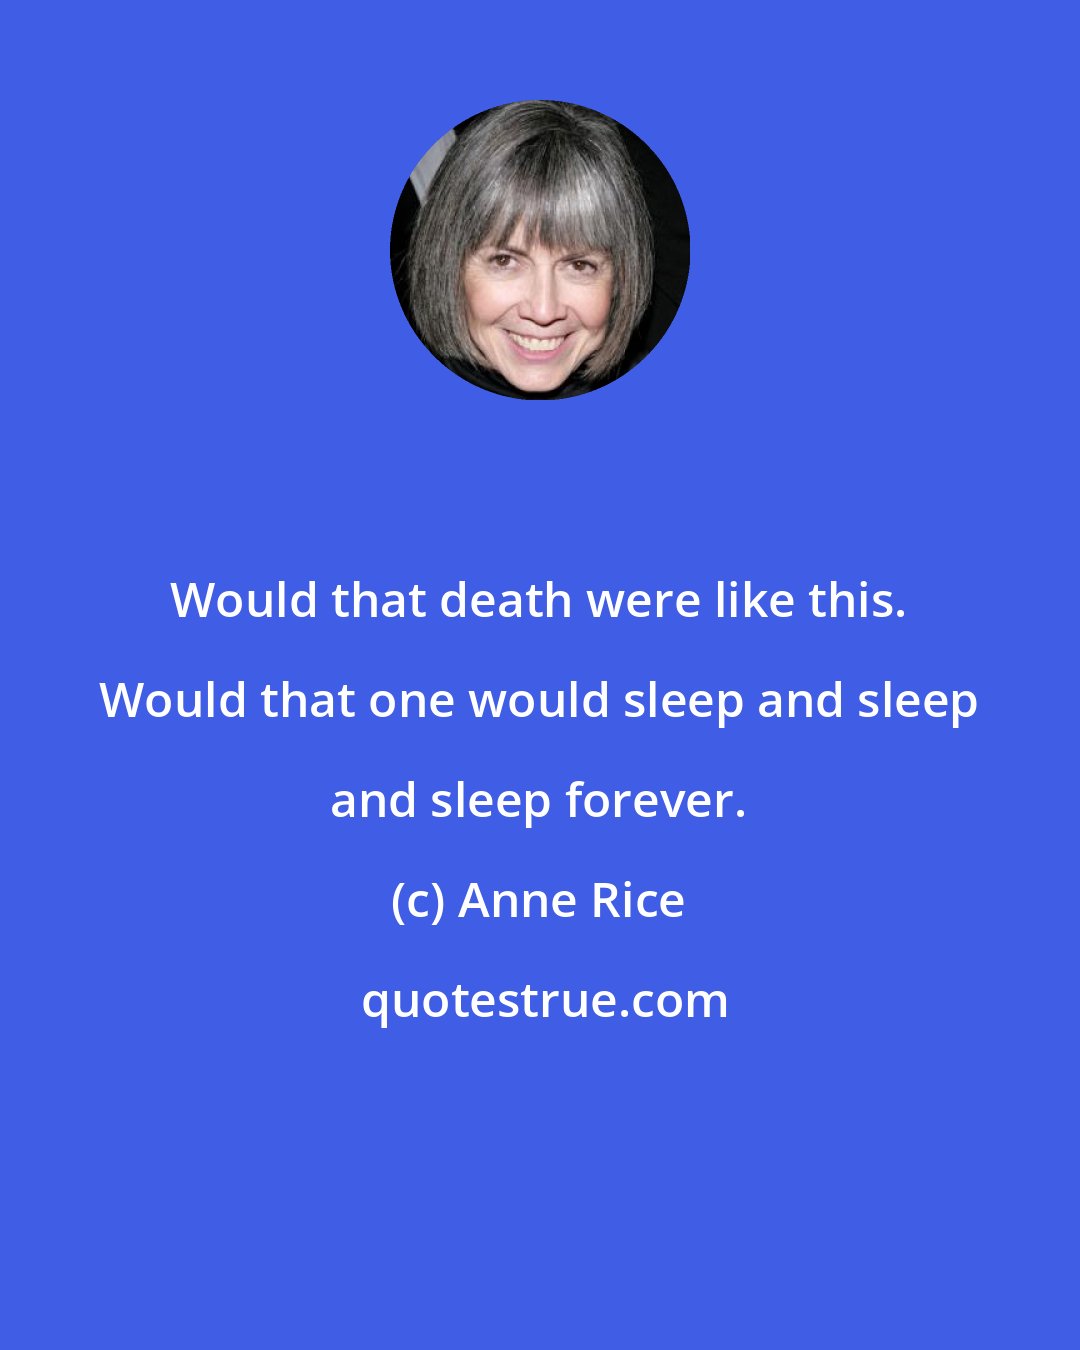 Anne Rice: Would that death were like this. Would that one would sleep and sleep and sleep forever.